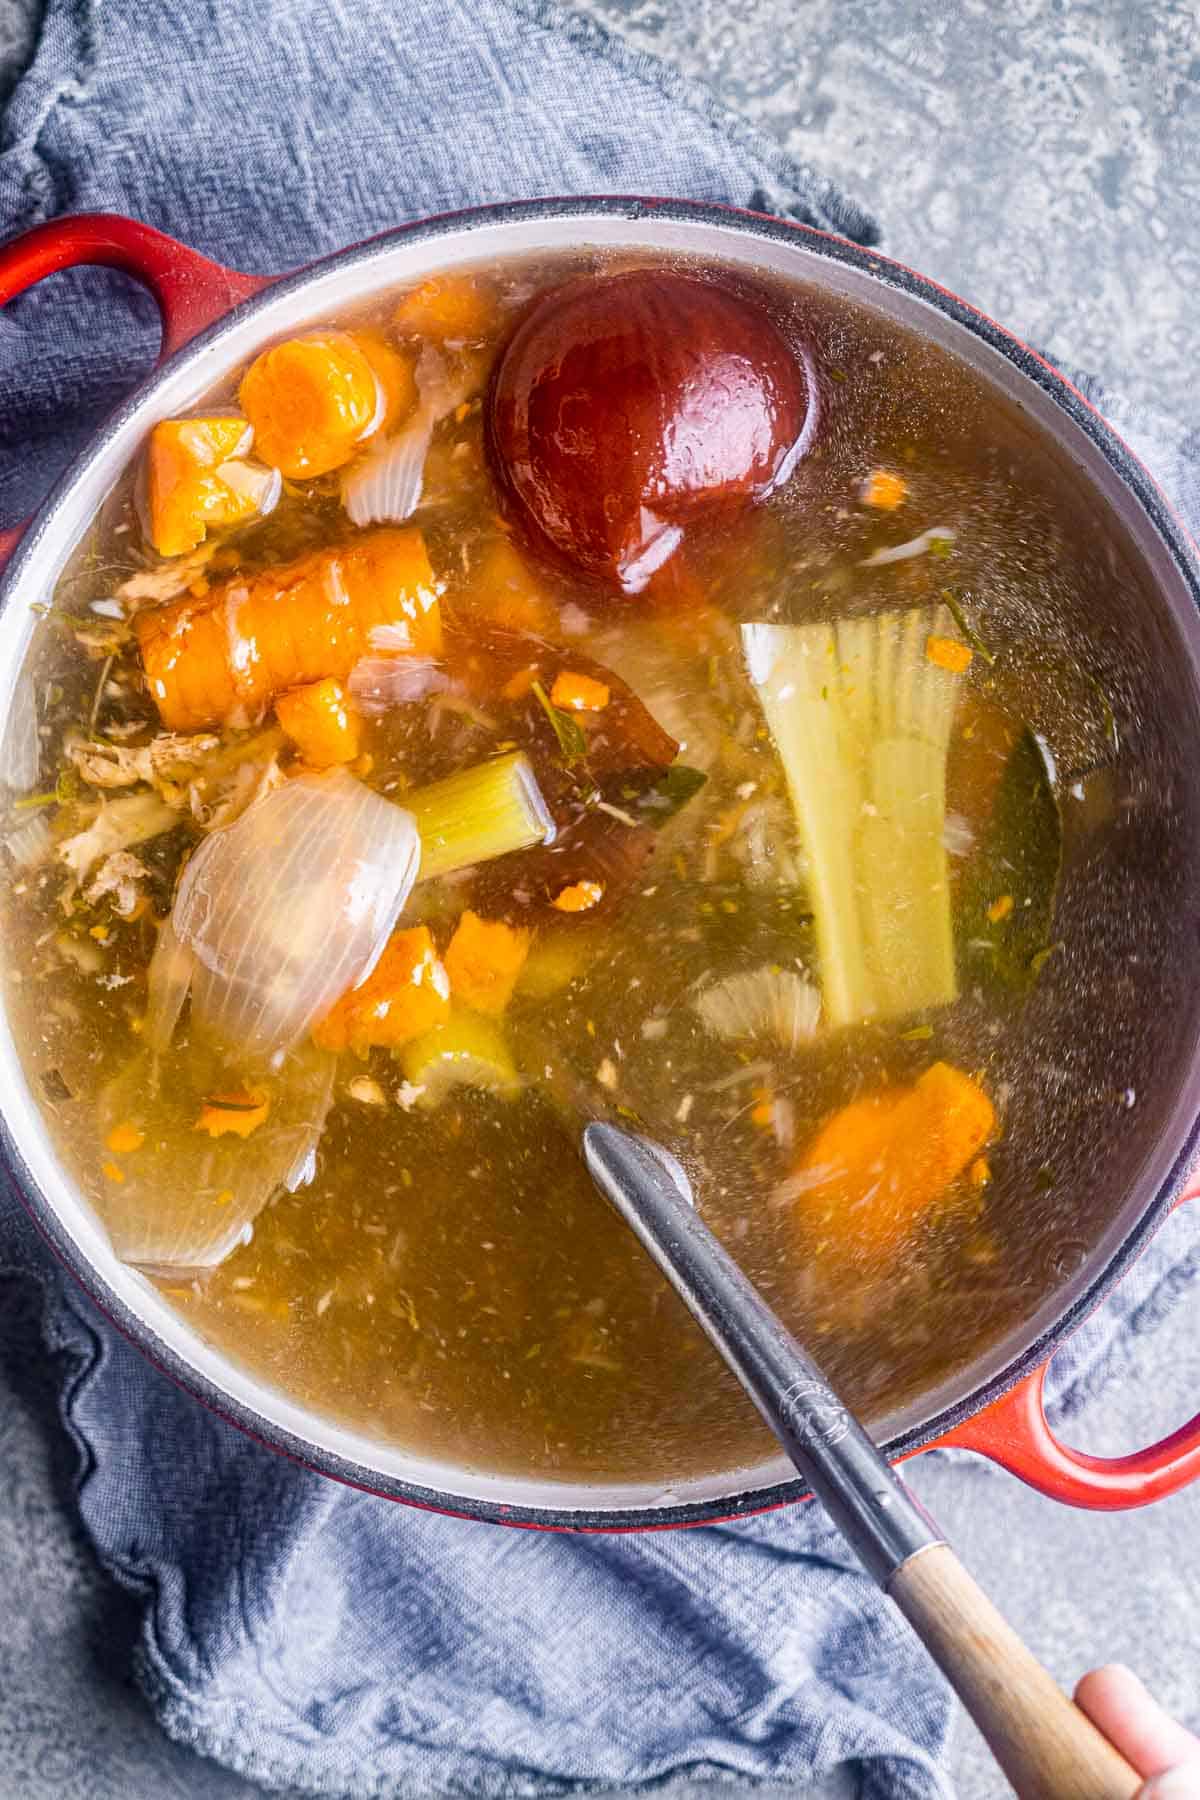 Dutch oven with stock ingredients and soup ladle